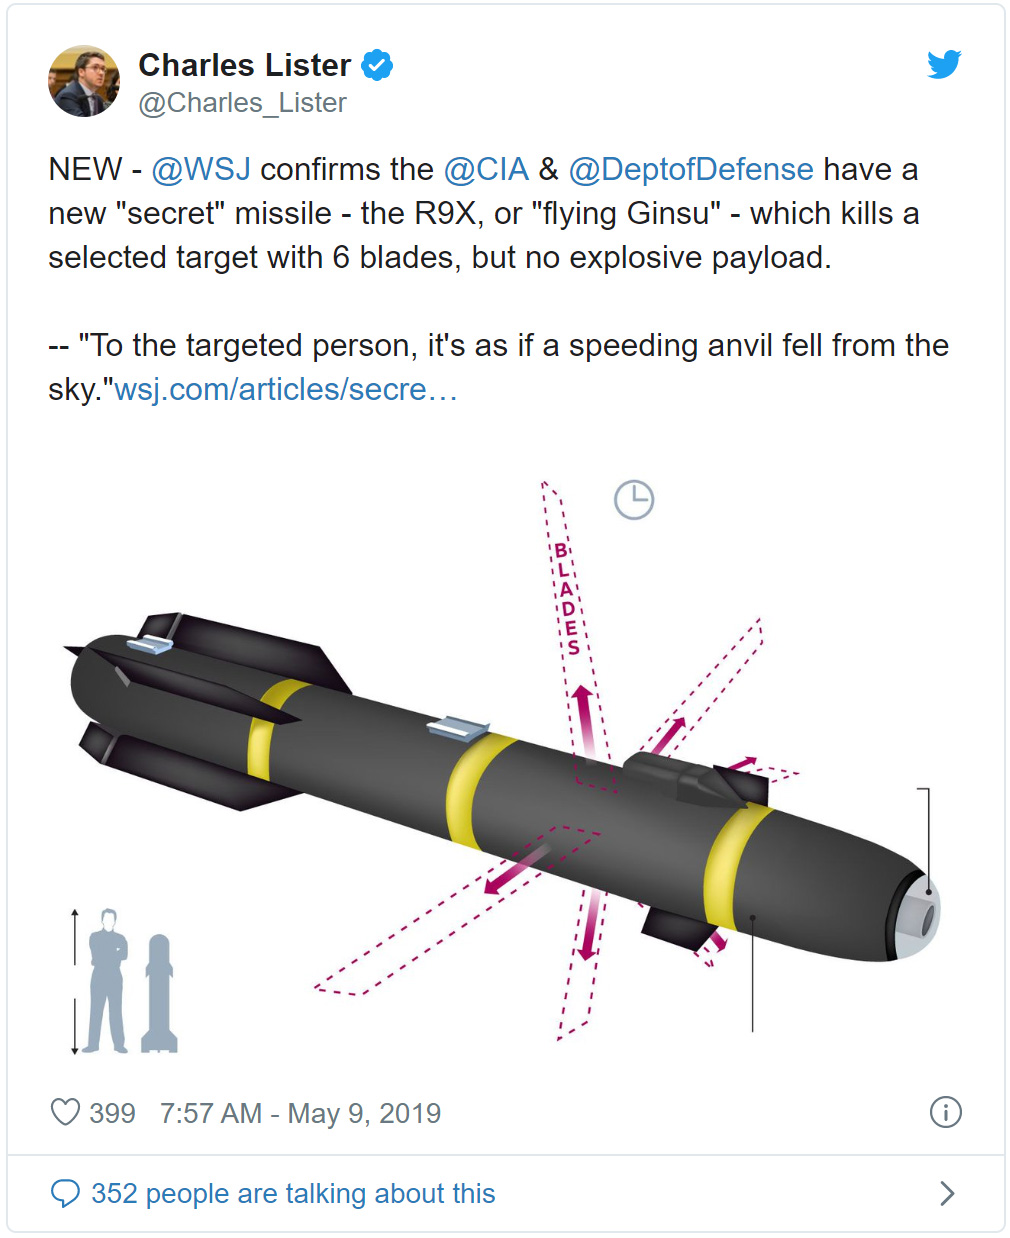 r9x missile - Charles Lister New confirms the & have a new "secret" missile the R9X, or "flying Ginsu" which kills a selected target with 6 blades, but no explosive payload. "To the targeted person, it's as if a speeding anvil fell from the sky."wsj.comar